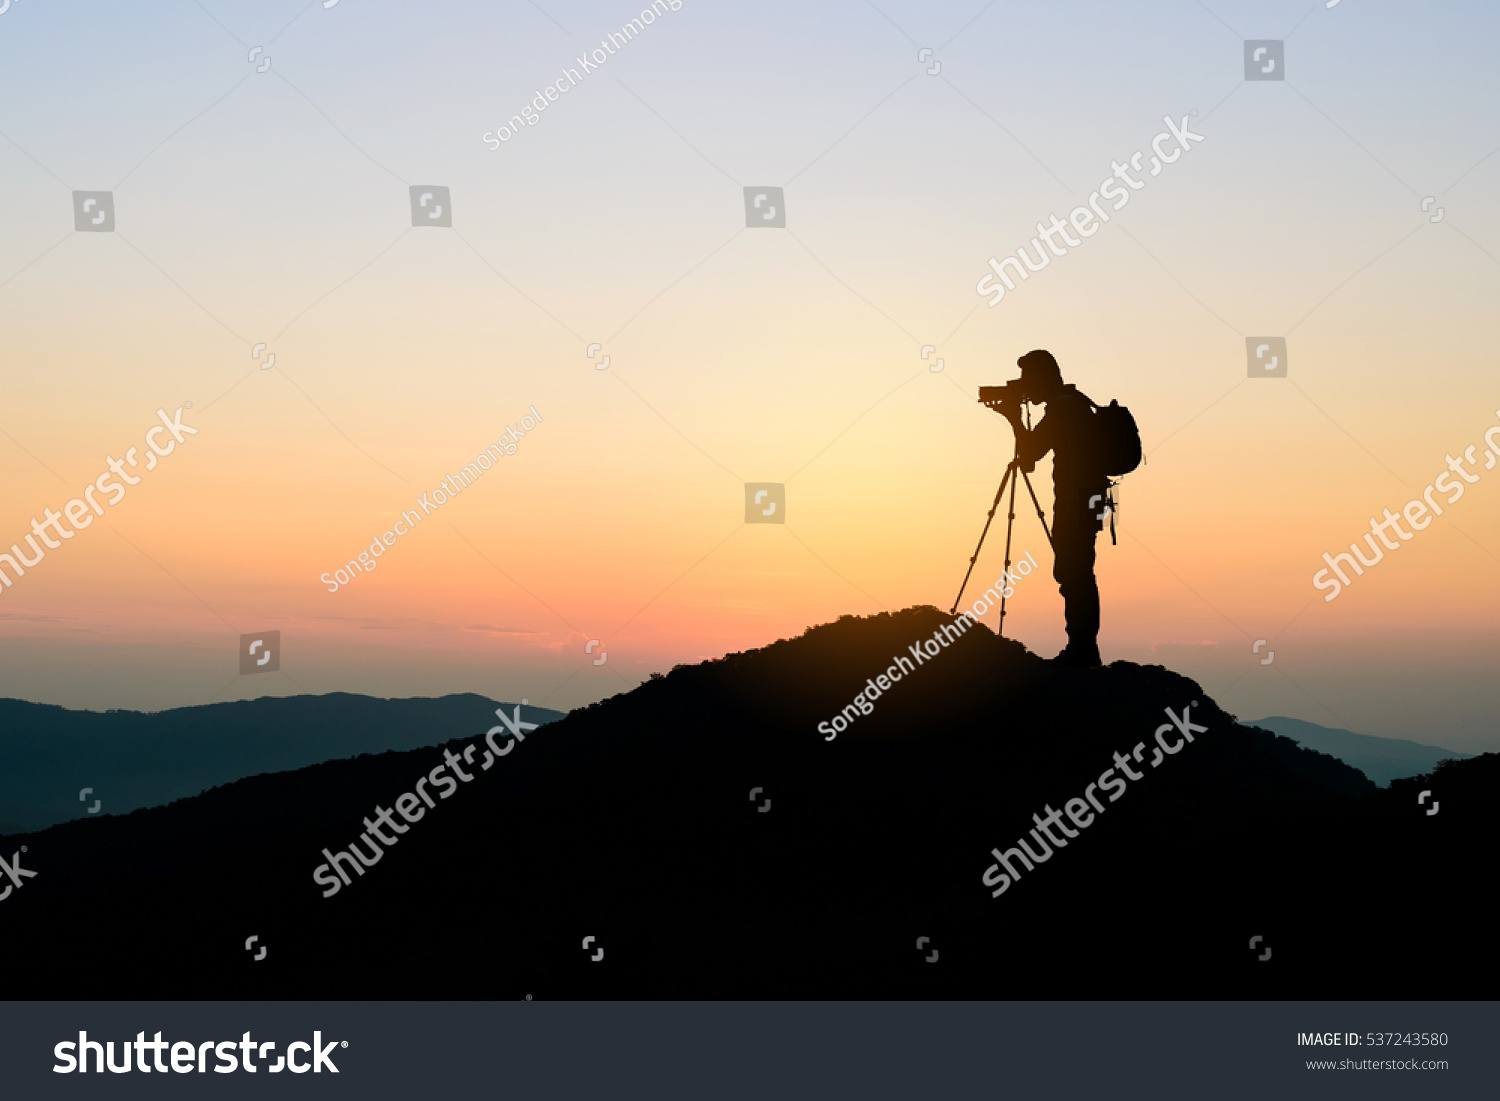 silhouette of photographer on top of mountain at sunset background #537243580